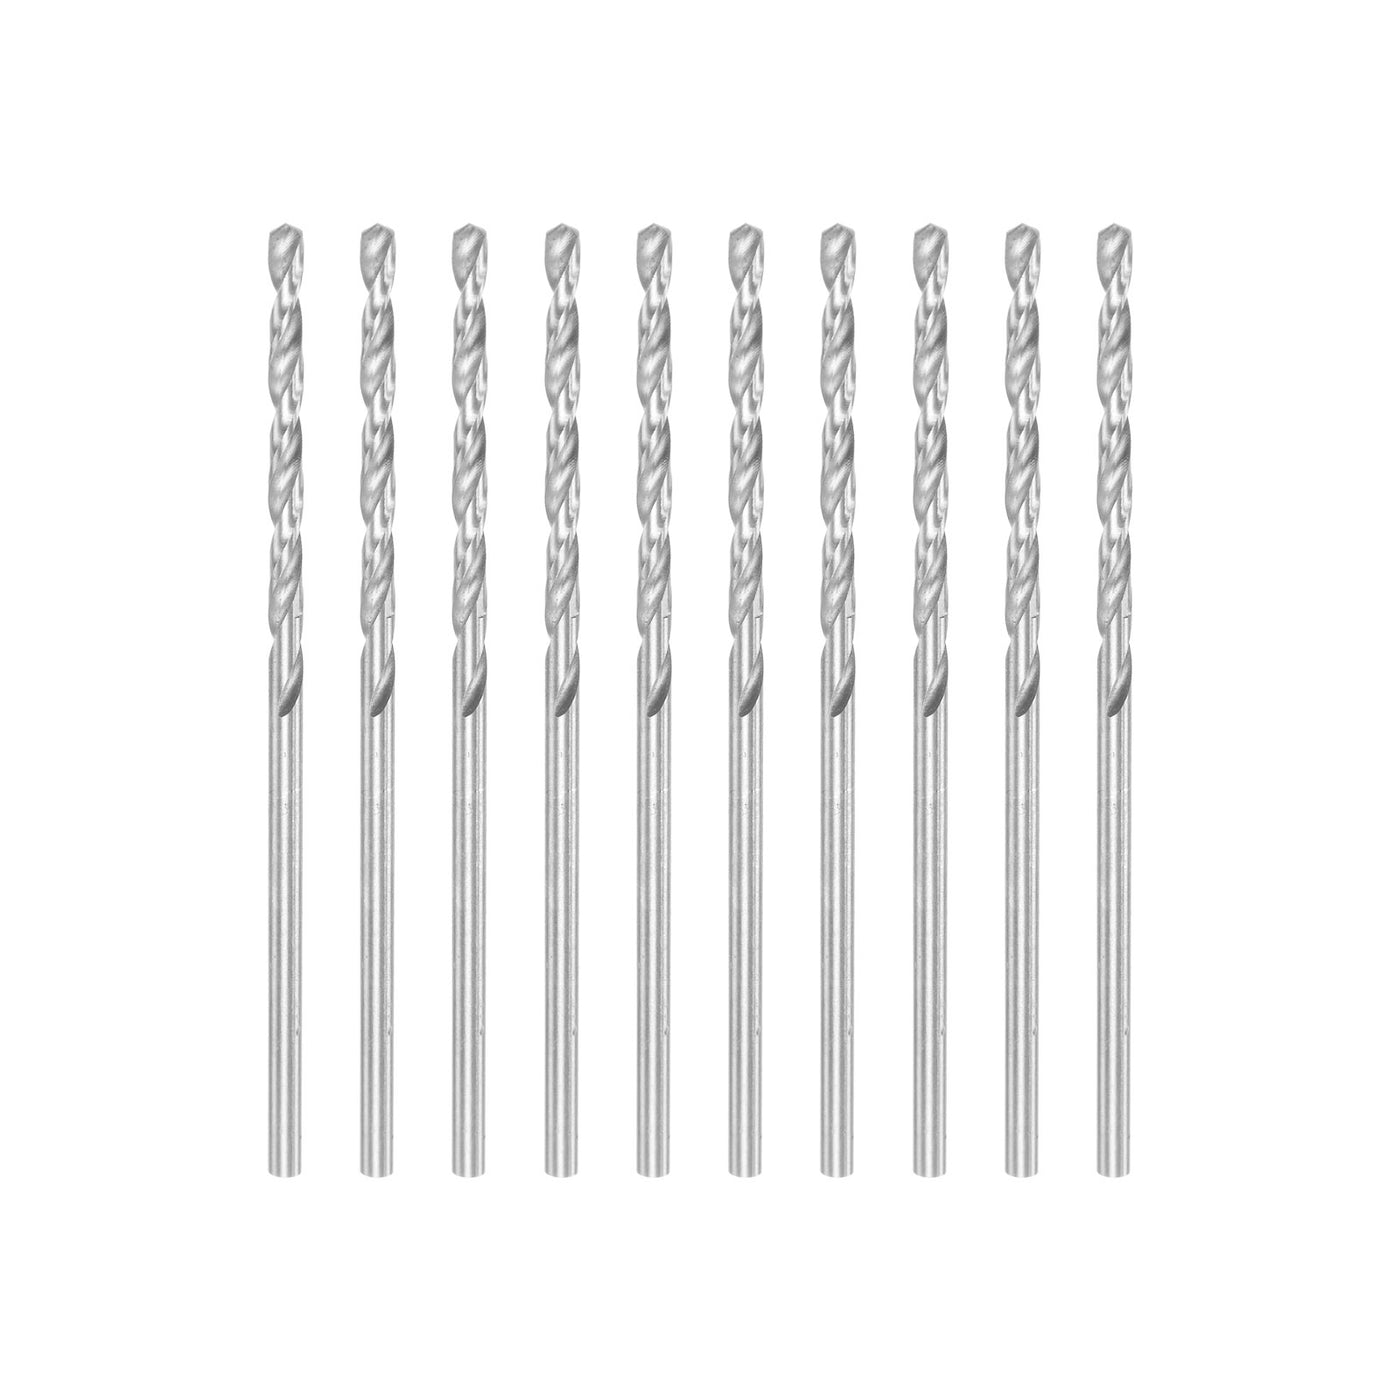 uxcell Uxcell 10 Pcs 2.05mm High Speed Steel Drill Bits, Fully Ground 59mm Length Drill Bit